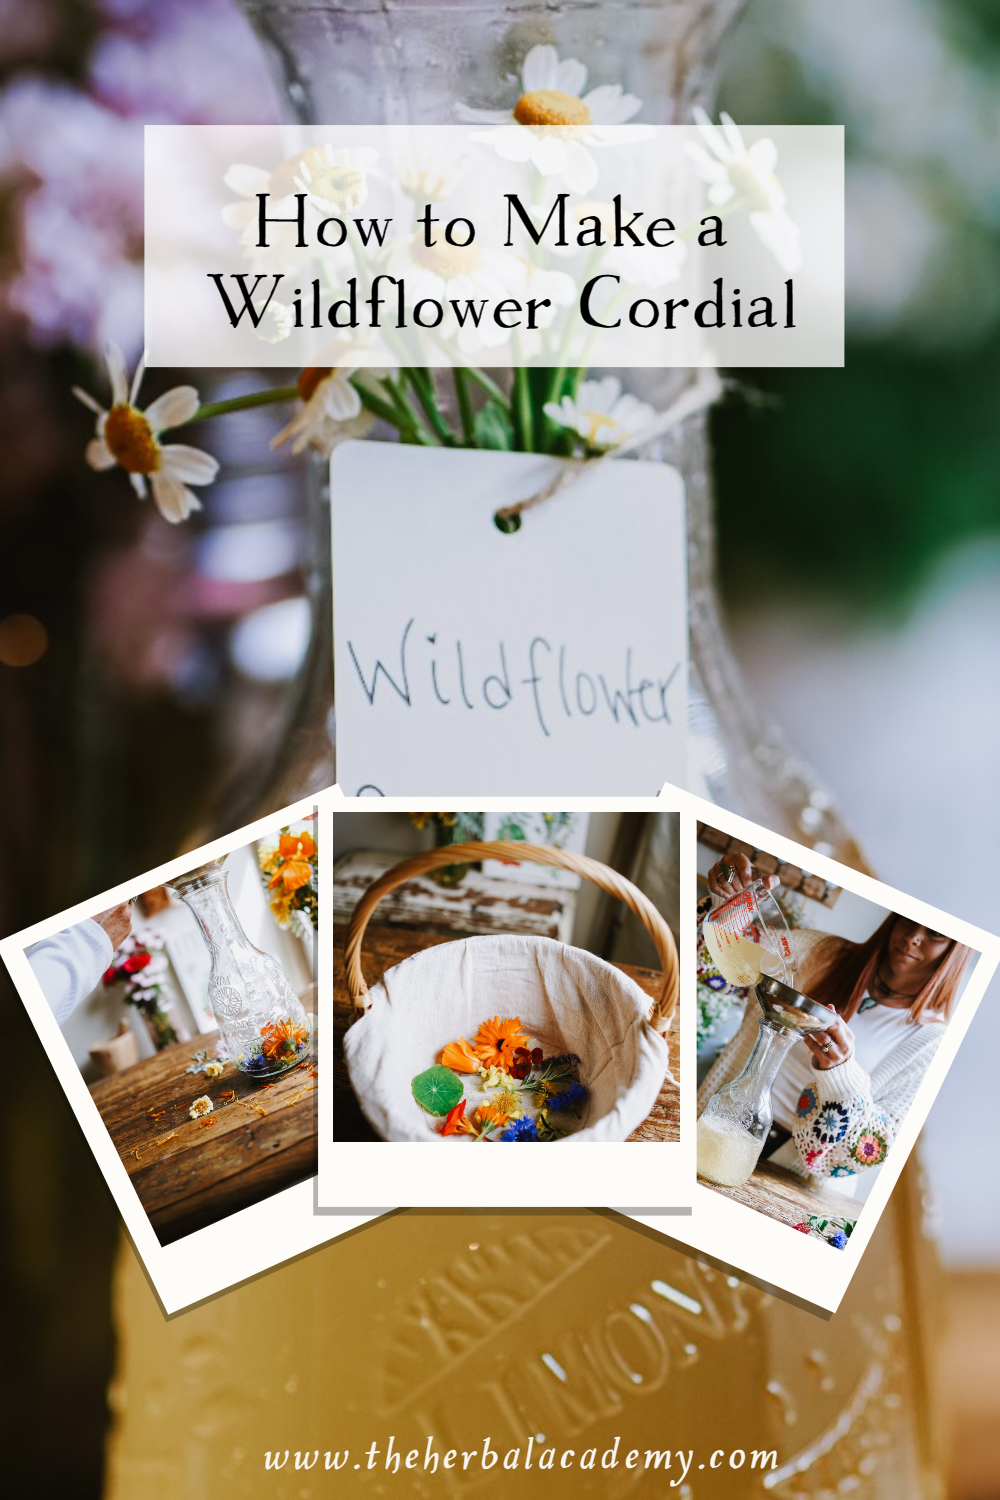 How to Make A Wildflower Cordial | Herbal Academy | Wildflowers and wild fermentation come together to create a delicious and delightful spring-inspired cordial.